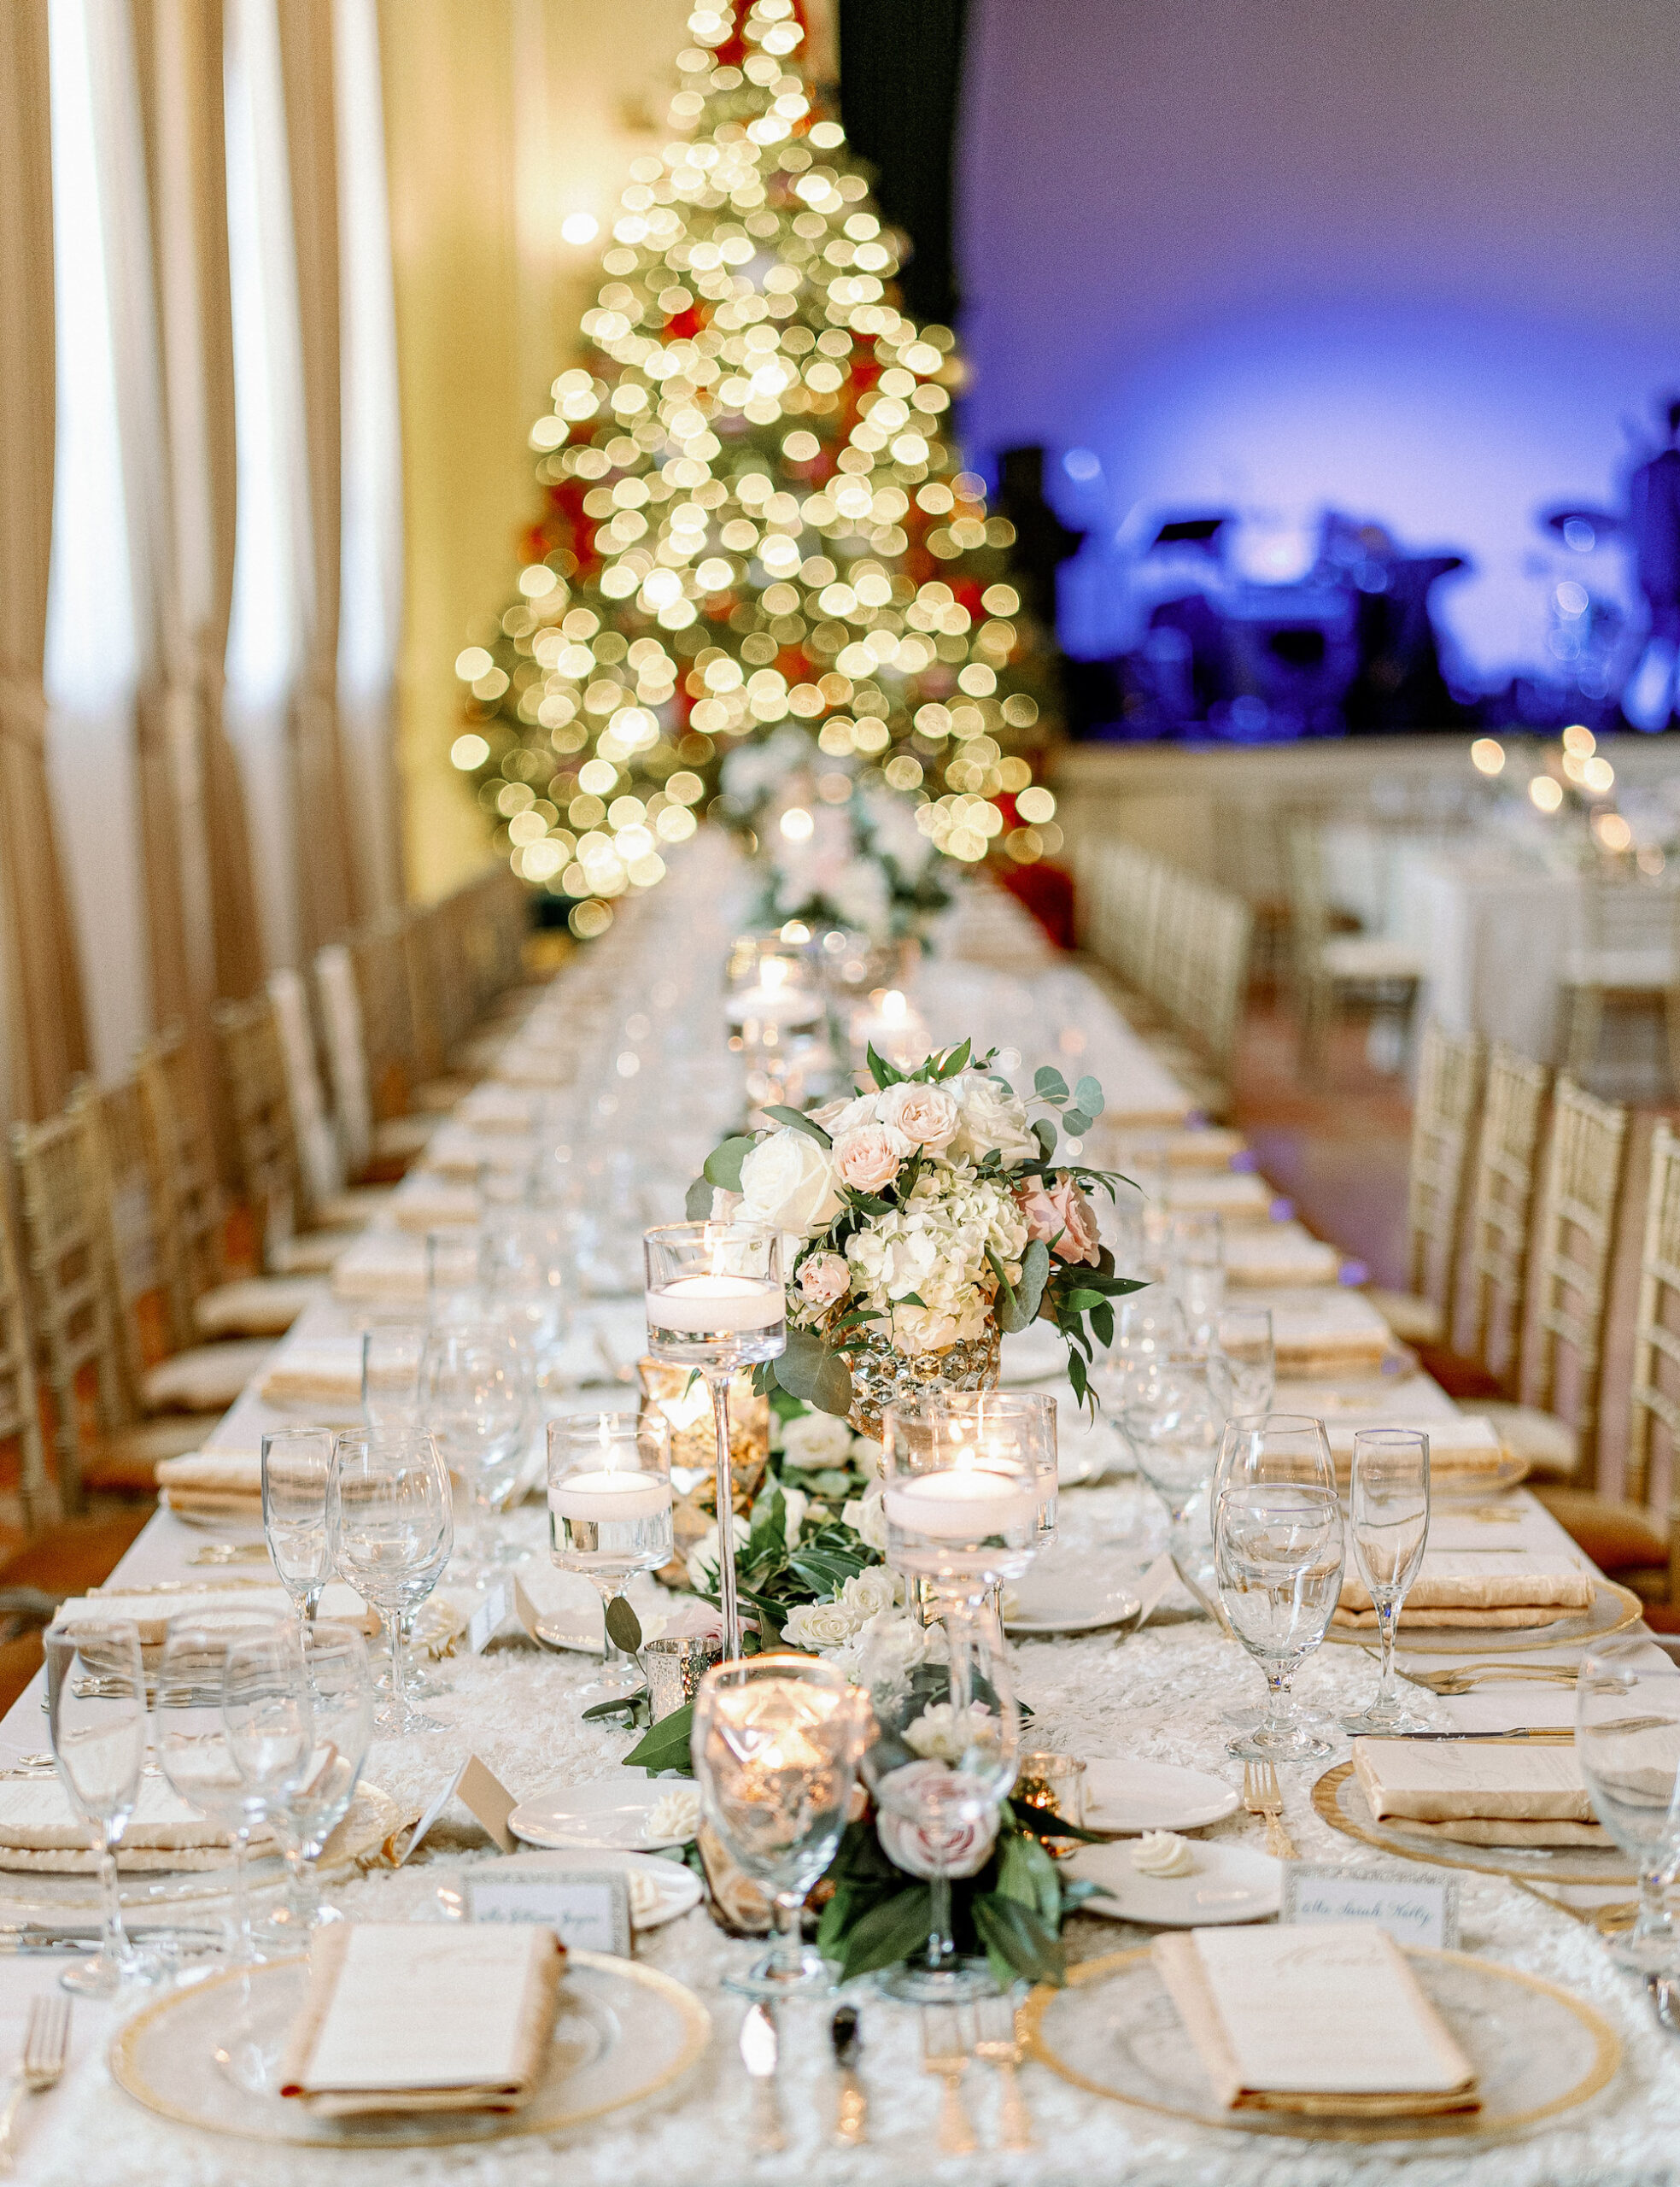 Elegant Eucalyptus Greenery Centerpieces with Gold Rimmed Chargers | Christmas Tree Wedding Decor Inspiration | Kate Ryan Event Rentals | Over The Top Rental Linens